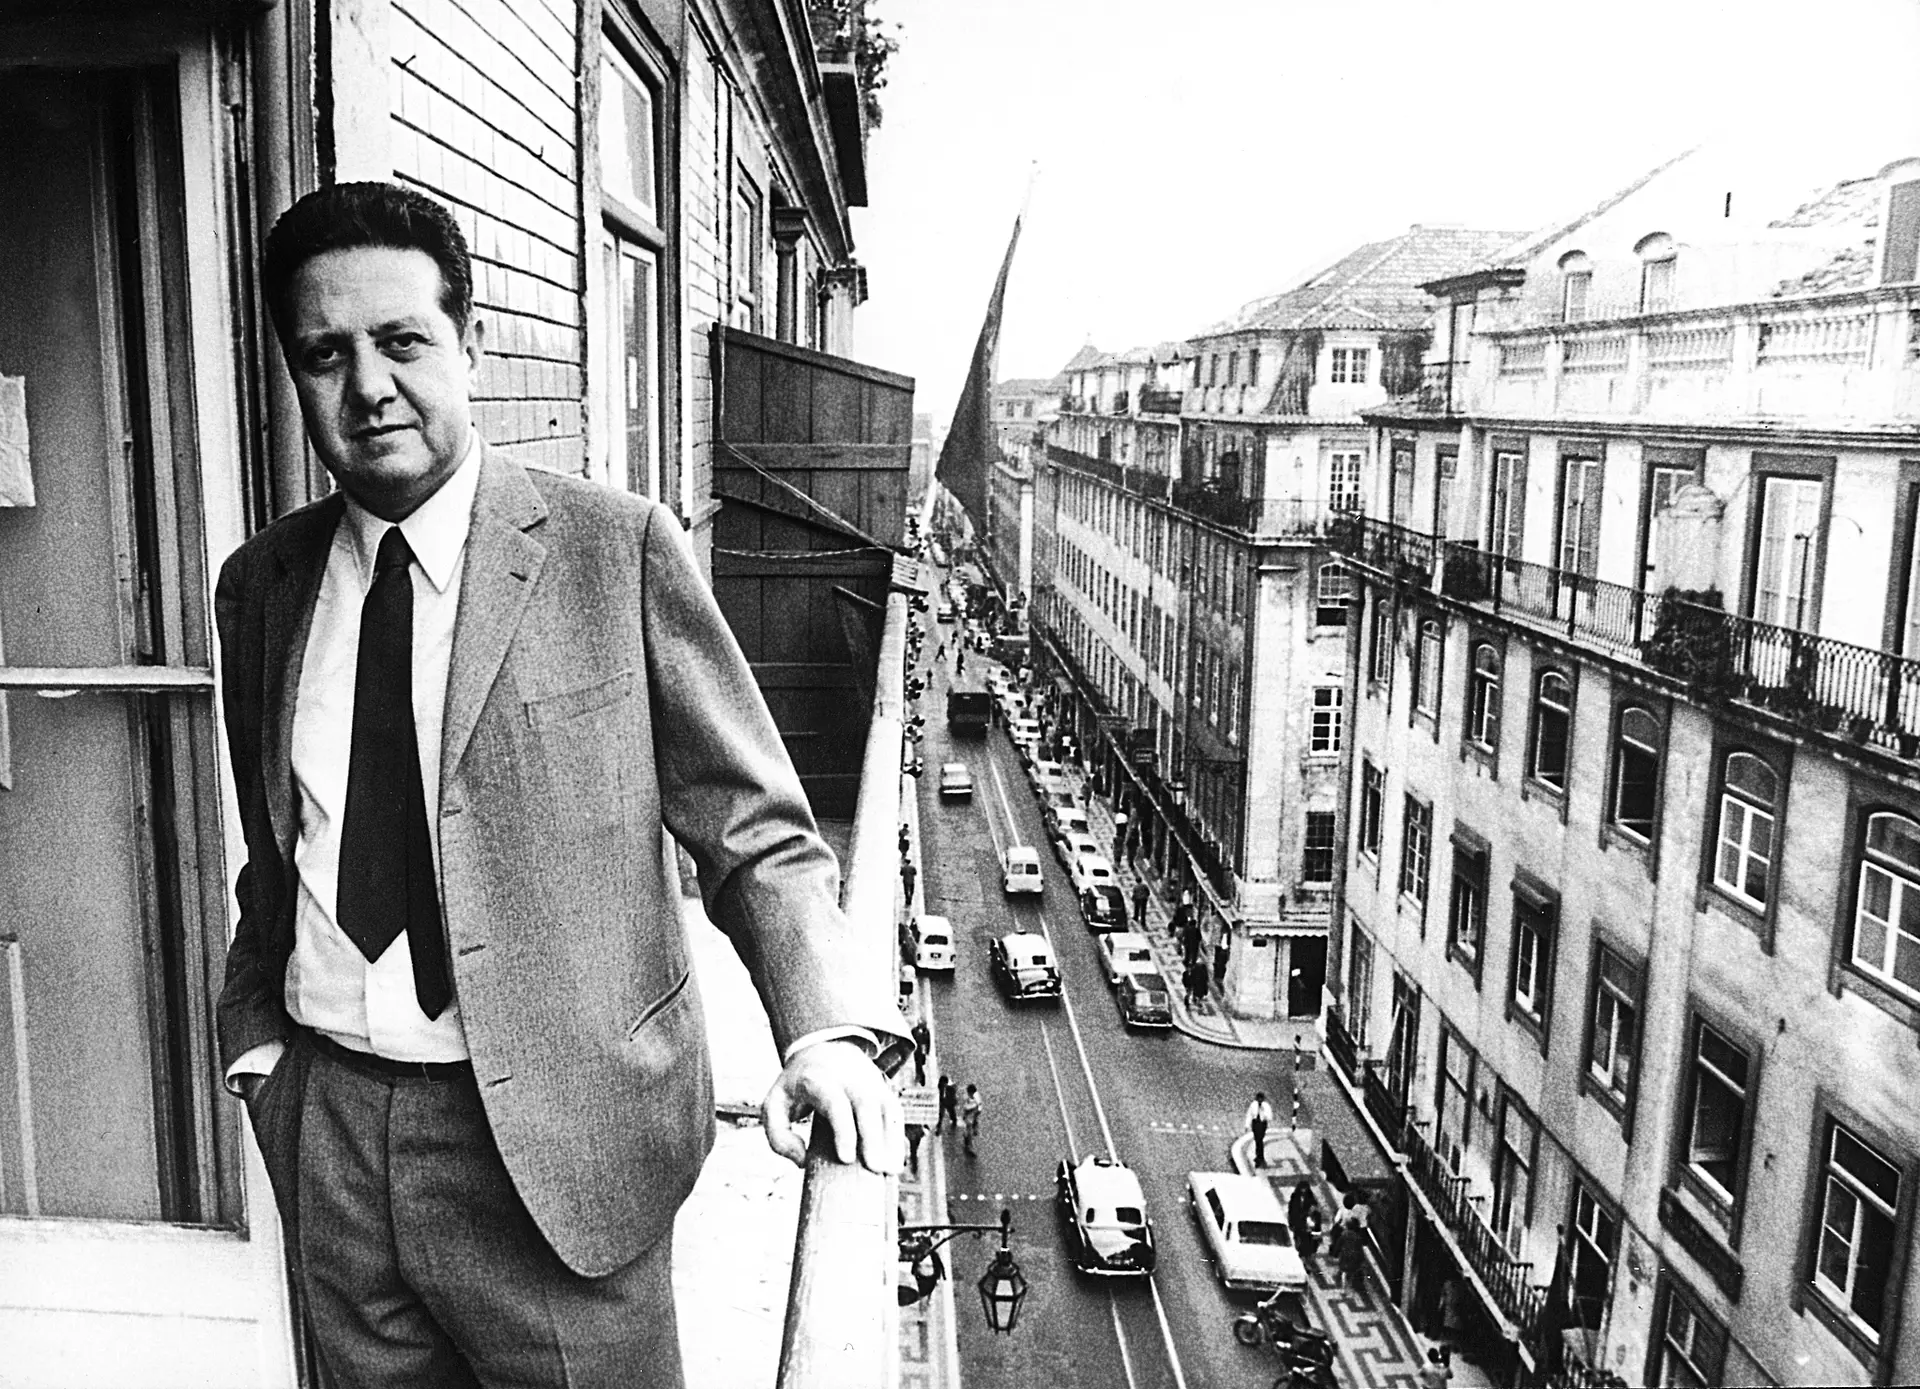 Mario Soares: One of the most influential Portuguese politicians, democracy builder, and founder of the Socialist Party